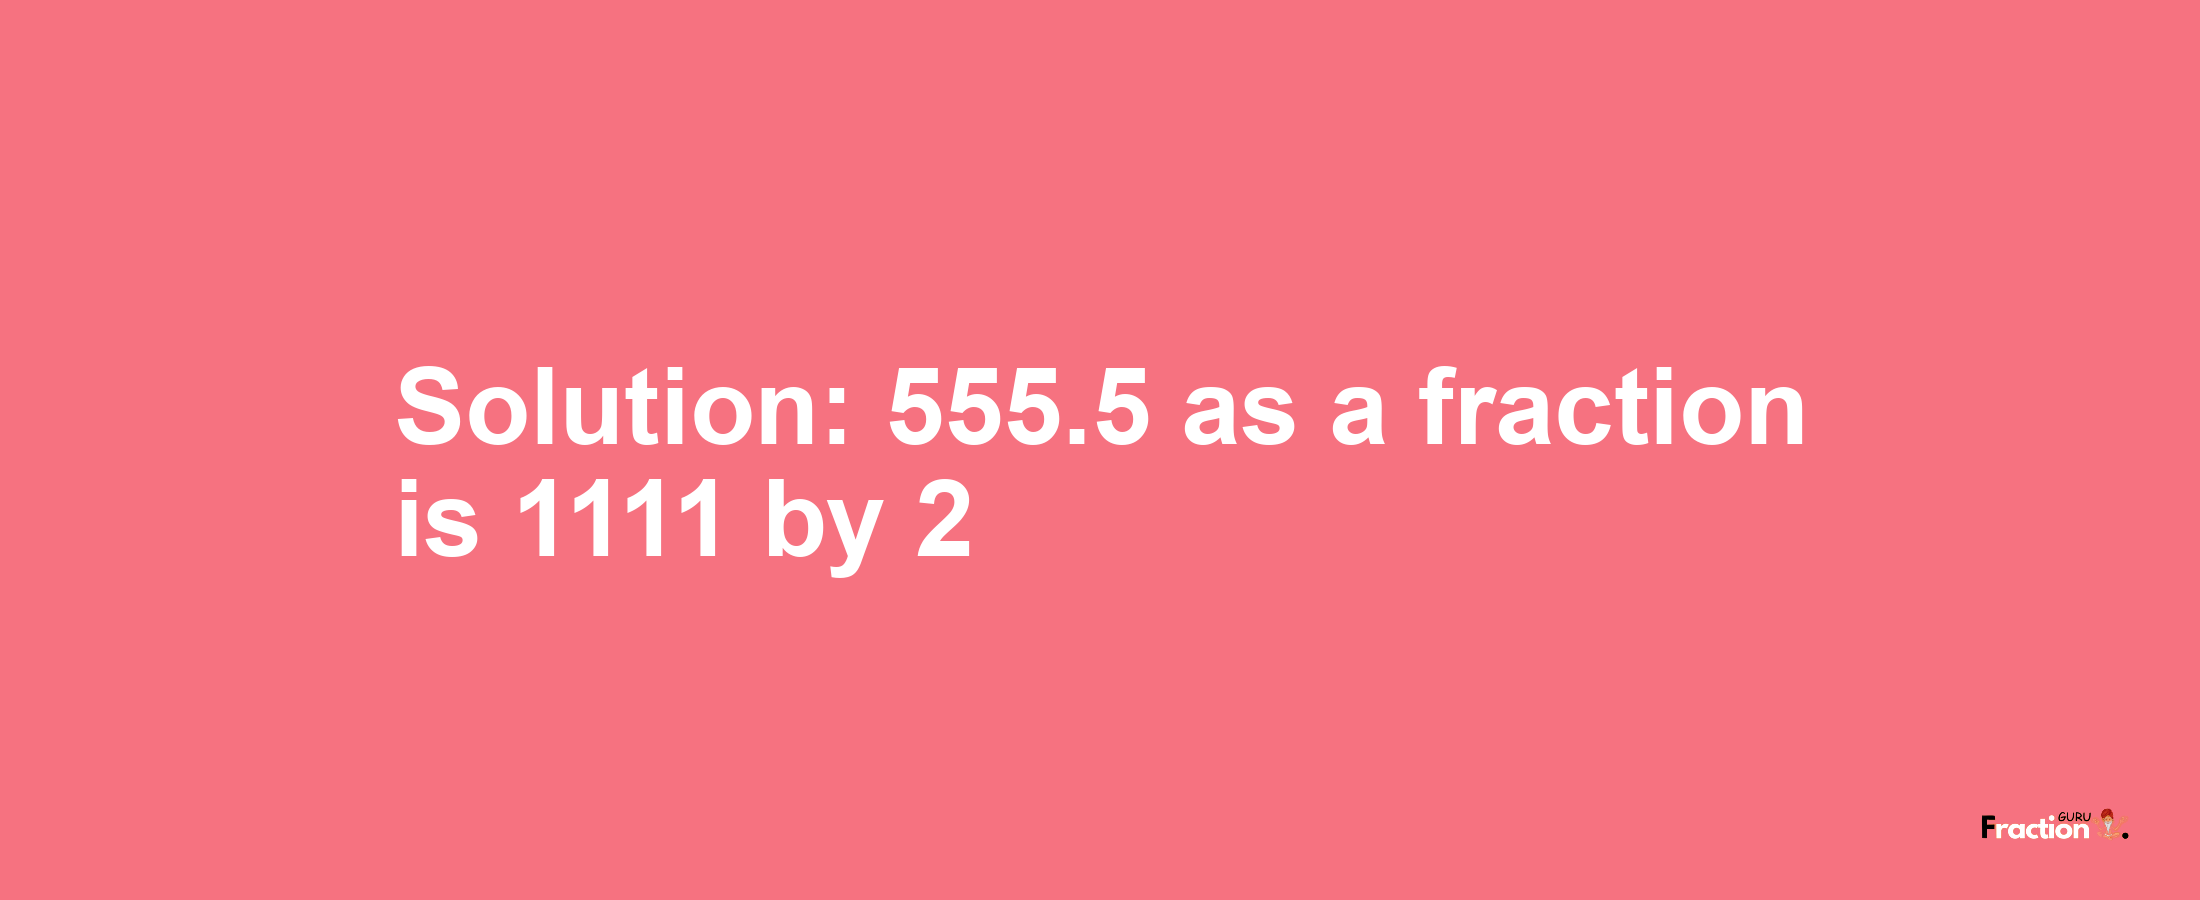 Solution:555.5 as a fraction is 1111/2